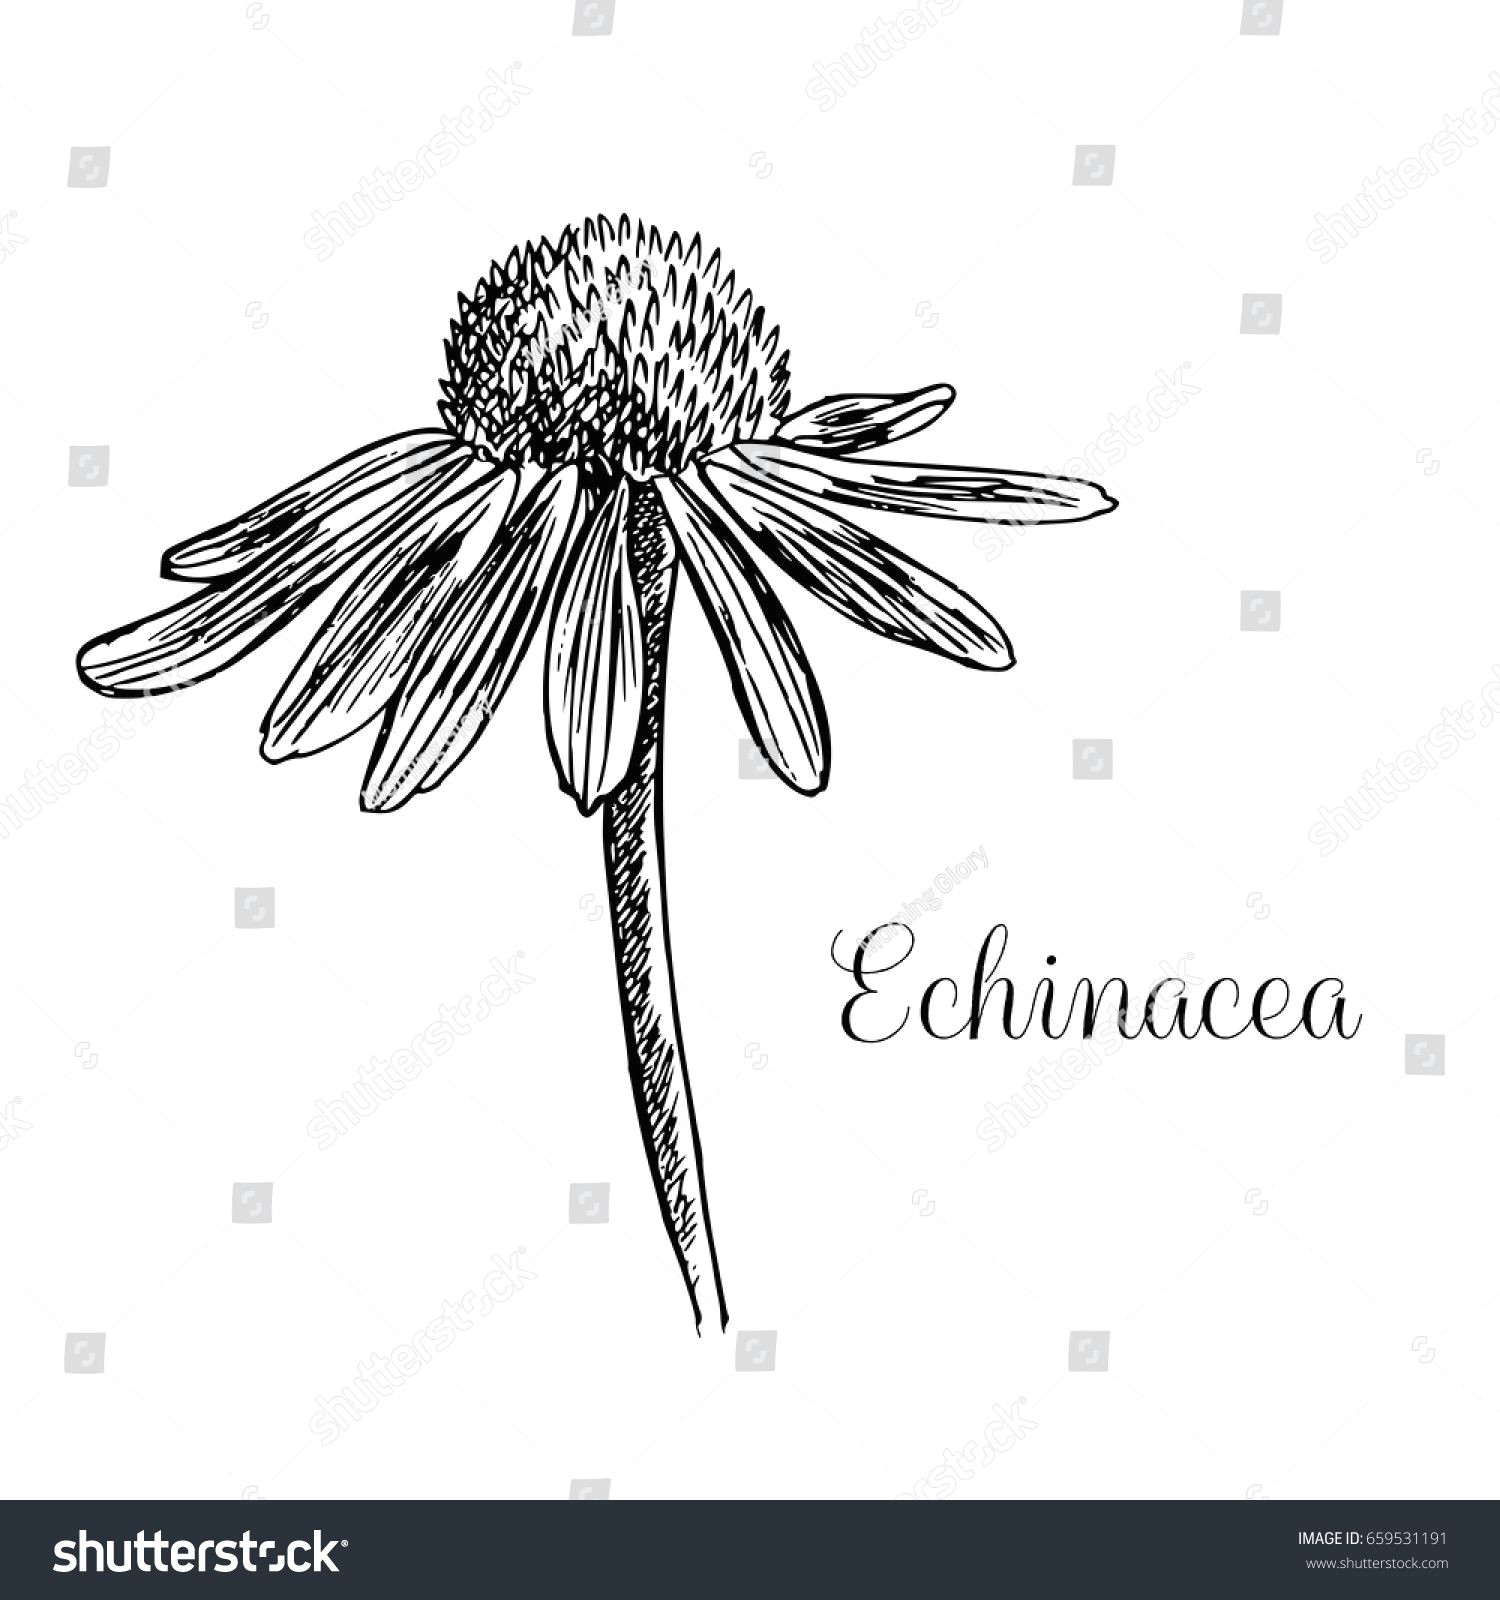 Drawings Of Cone Flowers Image Result for Echinacea Line Tattoo Pinterest Tattoo